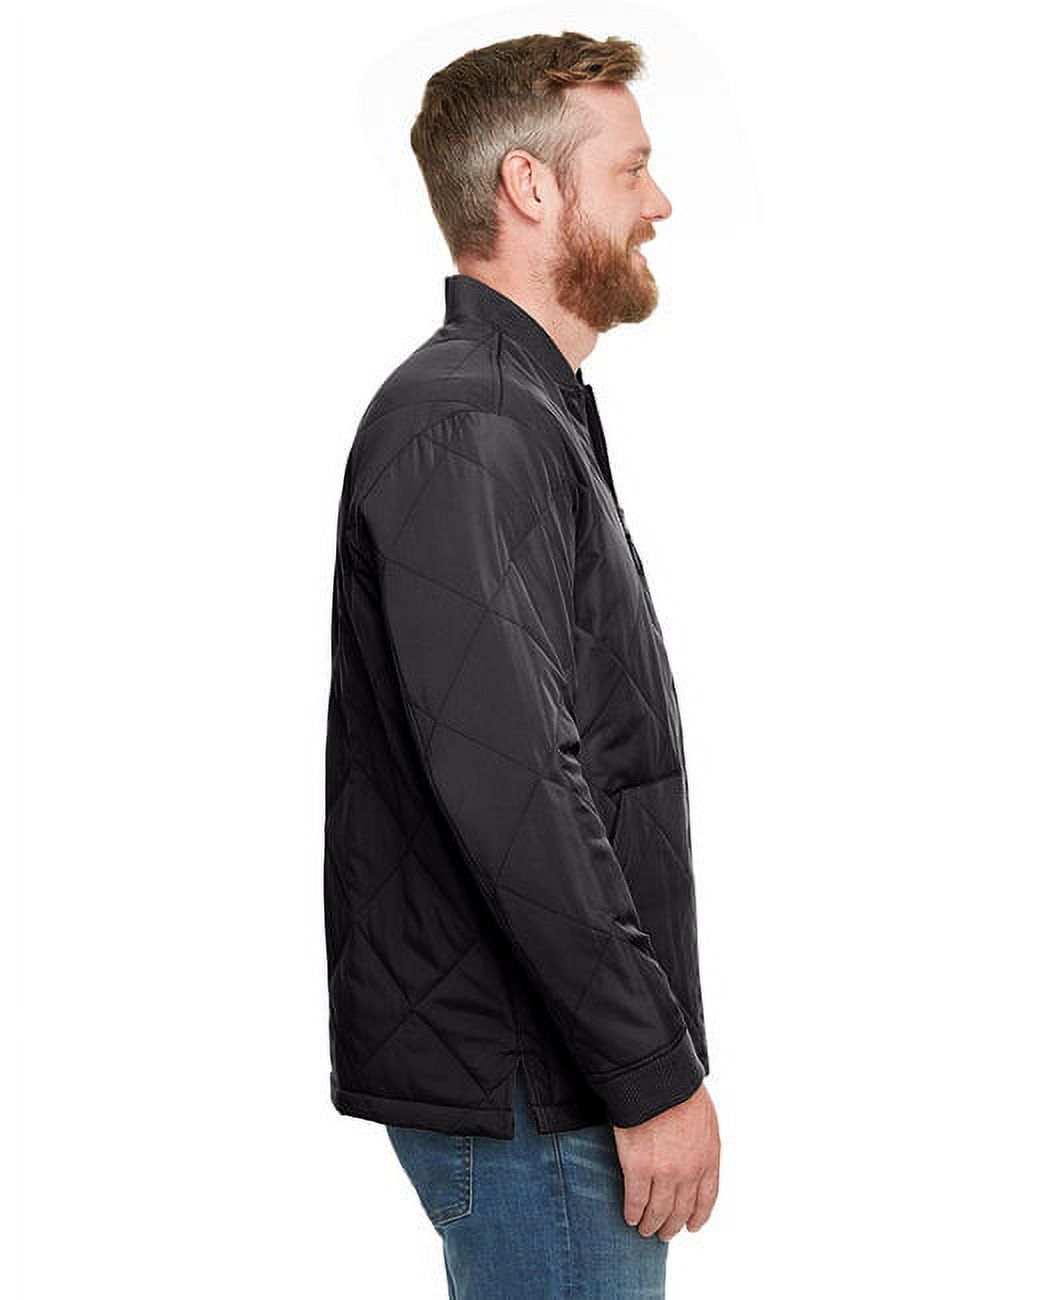 Adult Dockside Insulated Utility Jacket - DARK CHARCOAL - XL - image 3 of 3